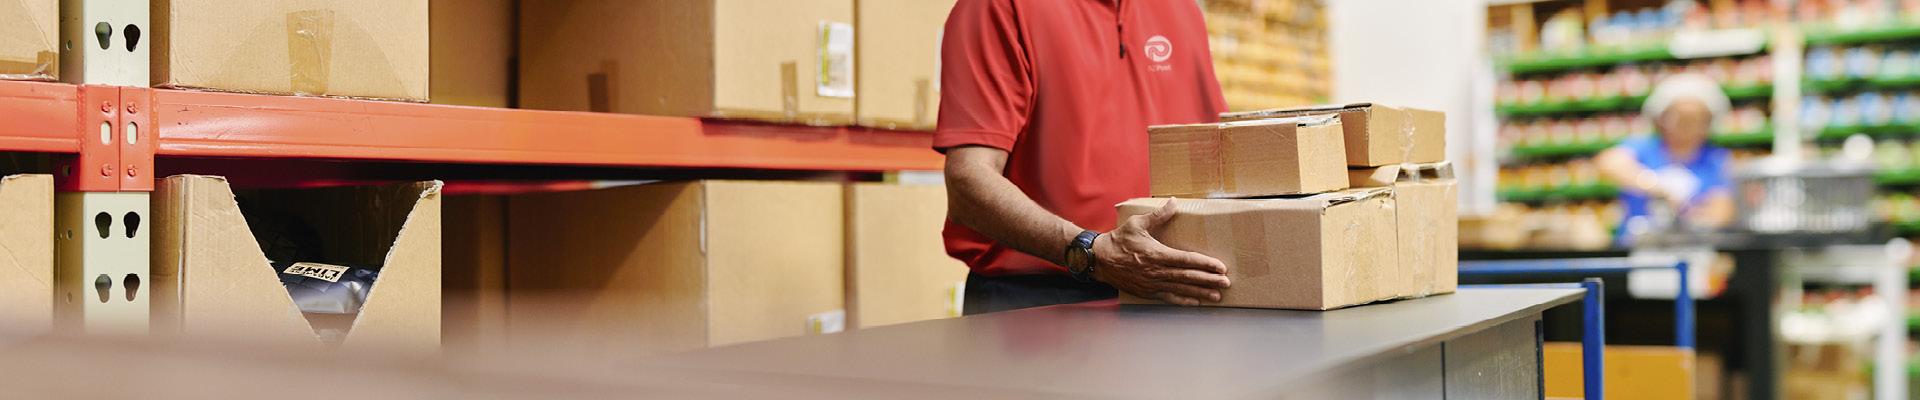 Person holding parcels on a counter